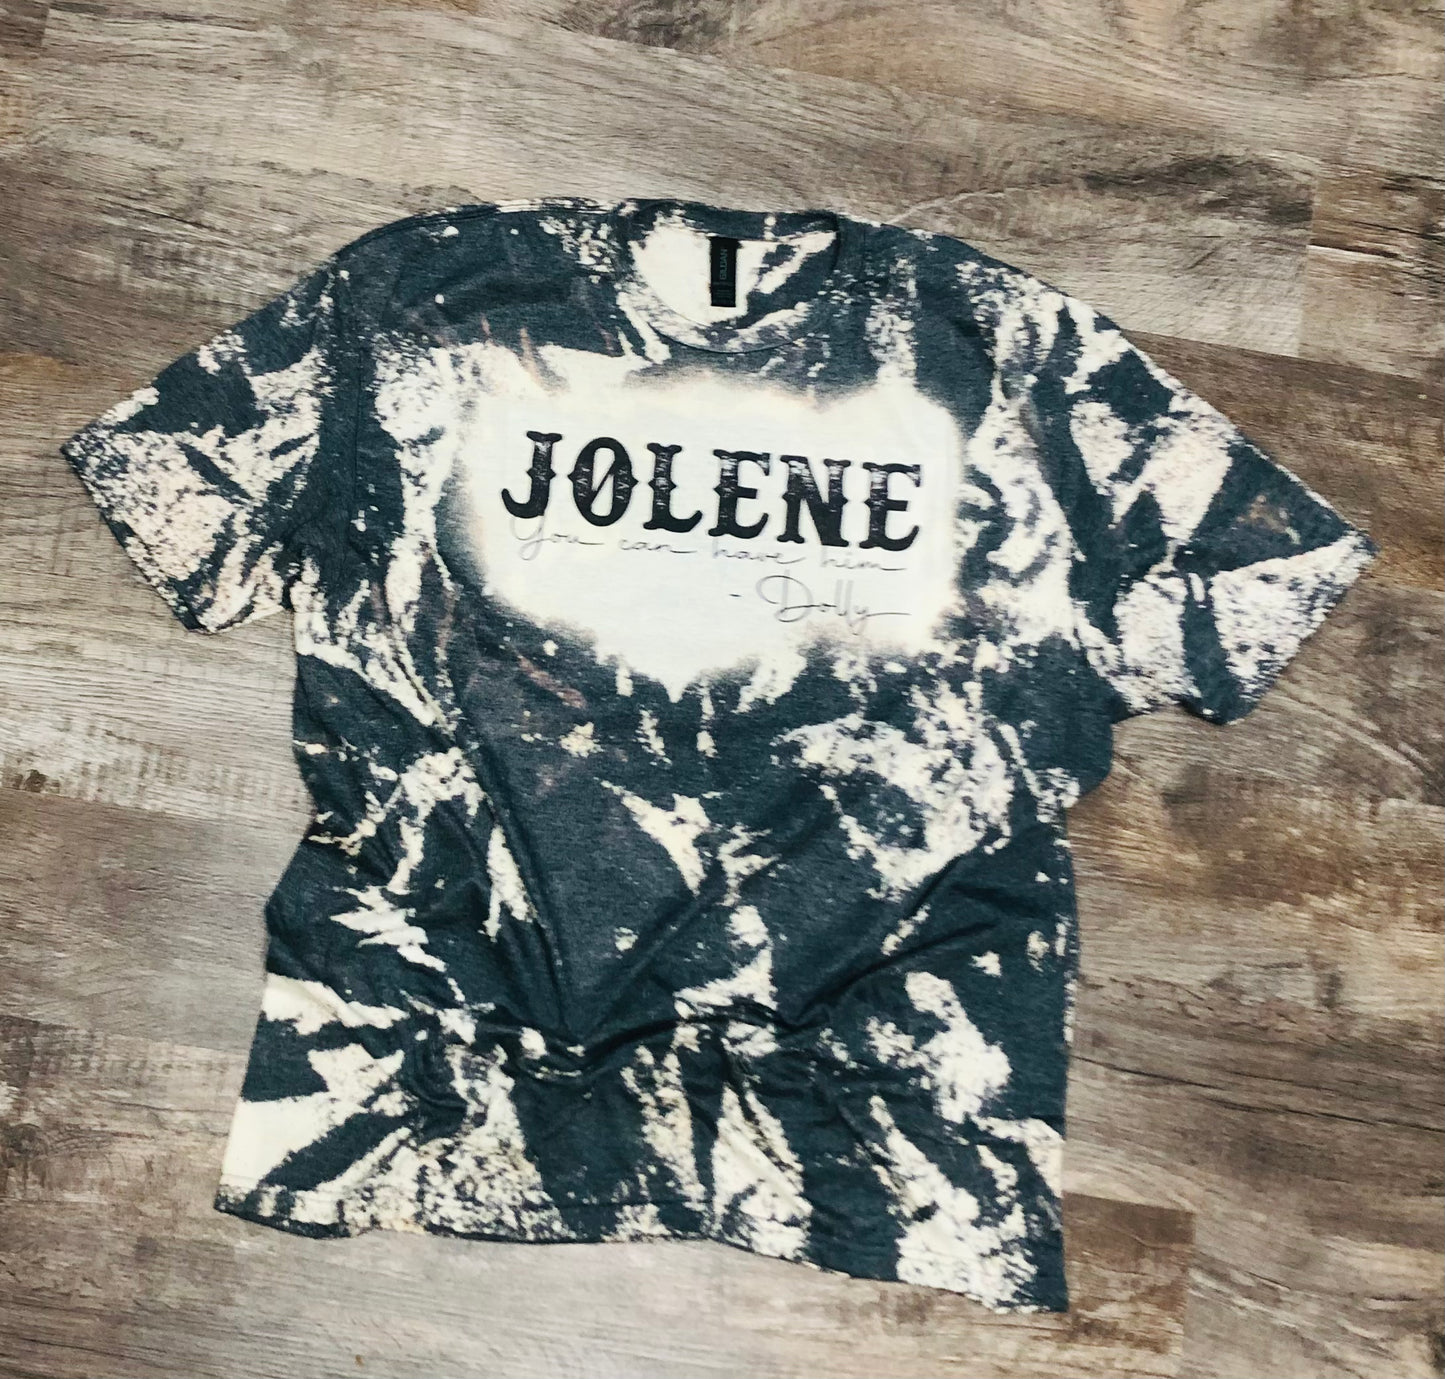 Jolene you can have him, Bleached Shirt